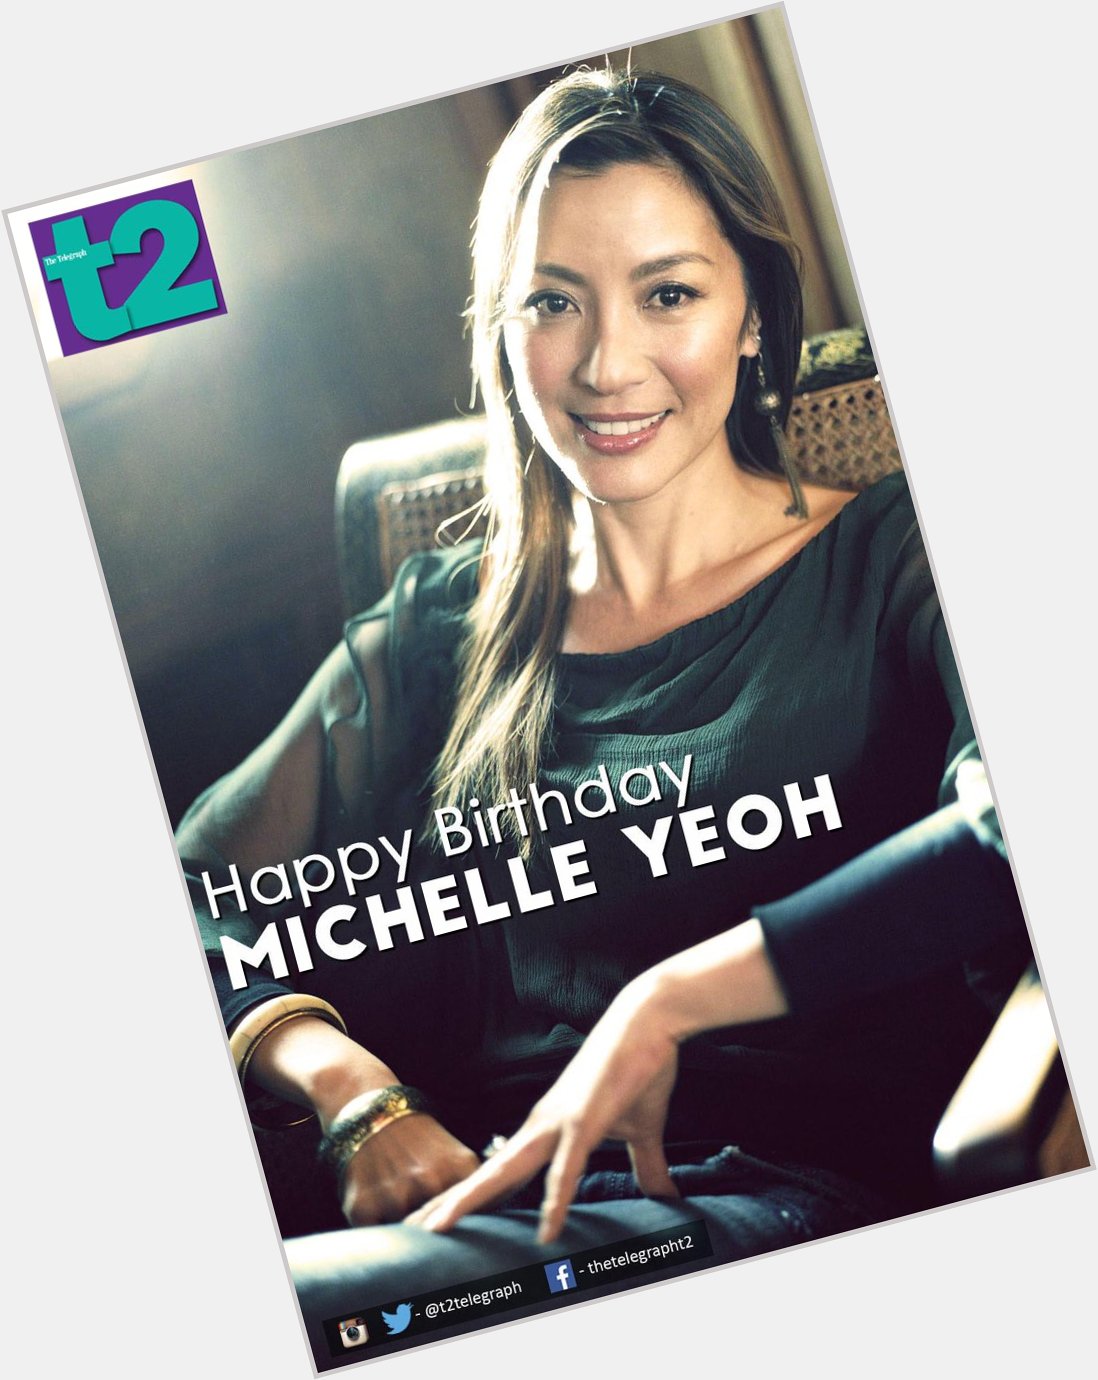 Happy birthday to the action queen Michelle Yeoh. or - which is your pick? 